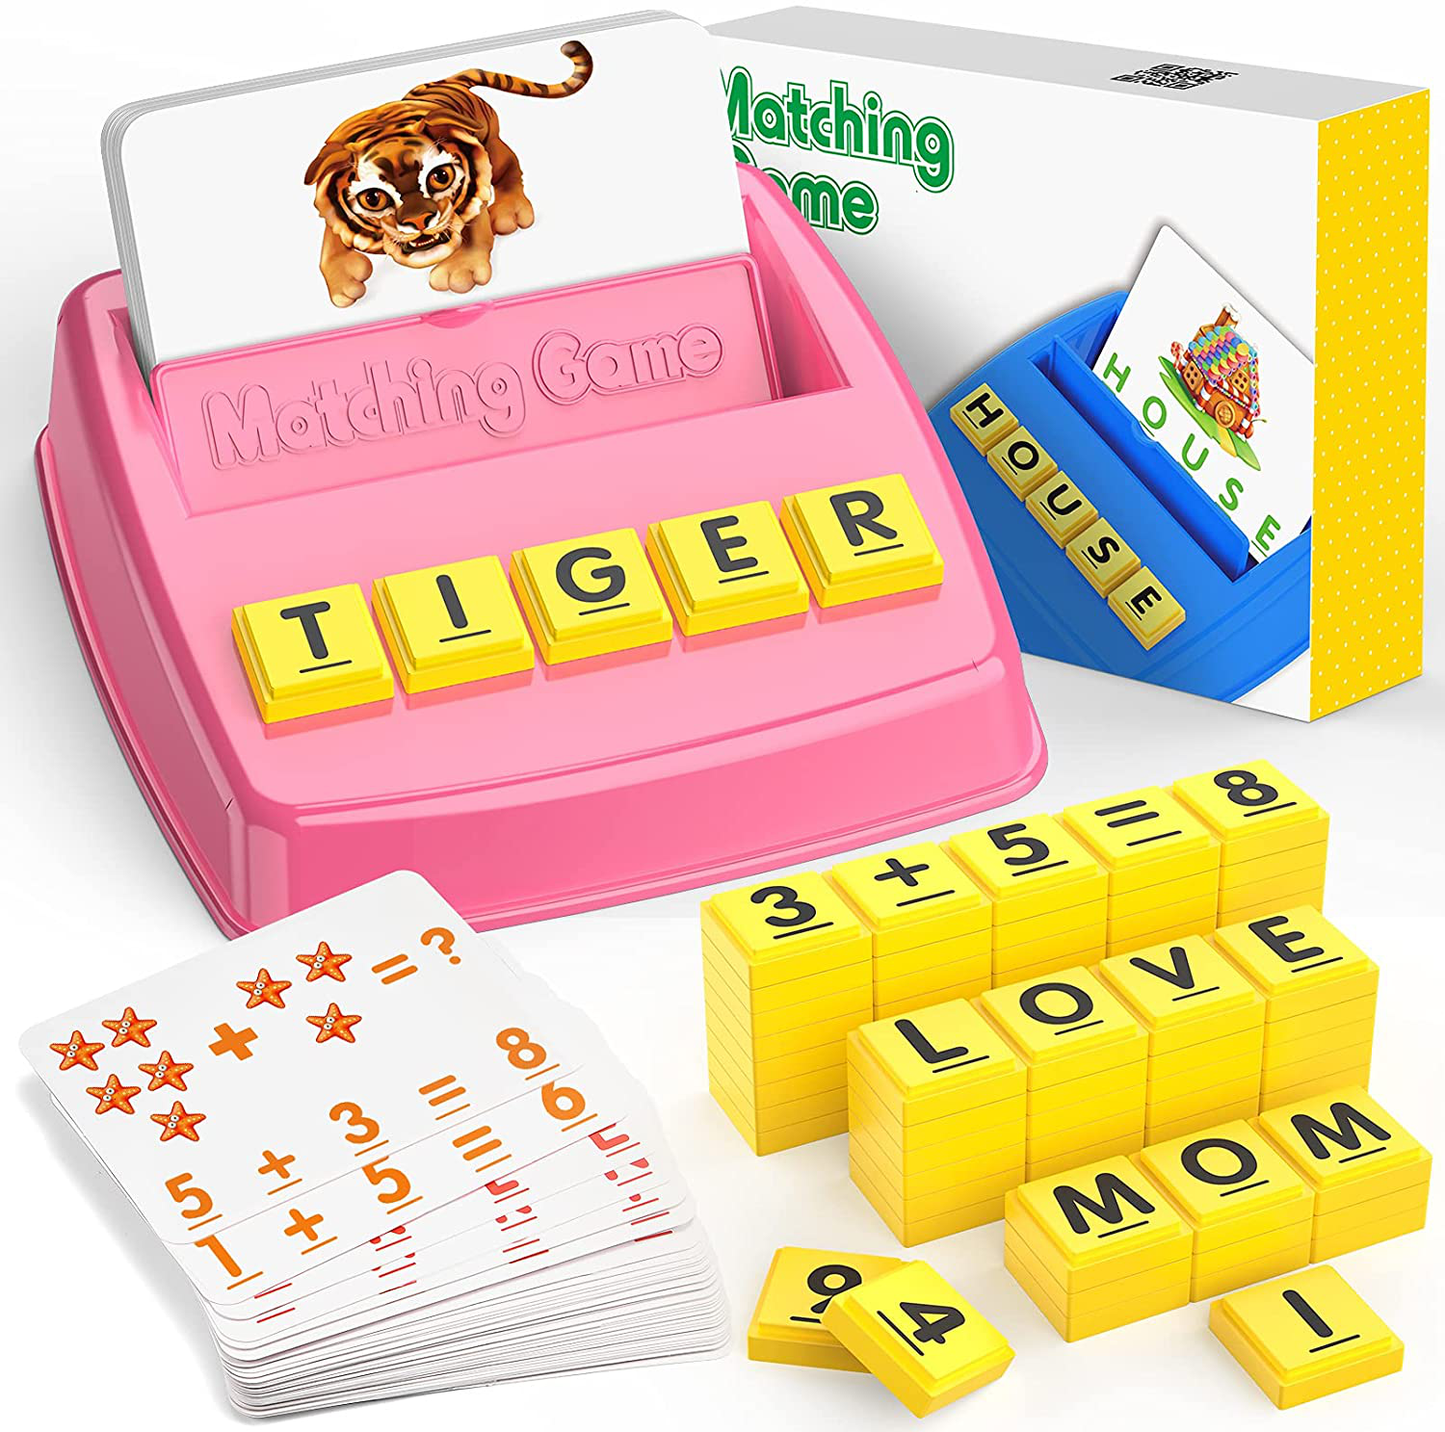 Birthday Gifts for Kids Age 2-8 Educational Toys for Toddlers Matching Letter Game Sight Words Learning Games for Preschoolers Learning Toys Alphabet Flashcards for Kids Stocking Stuffer Pink